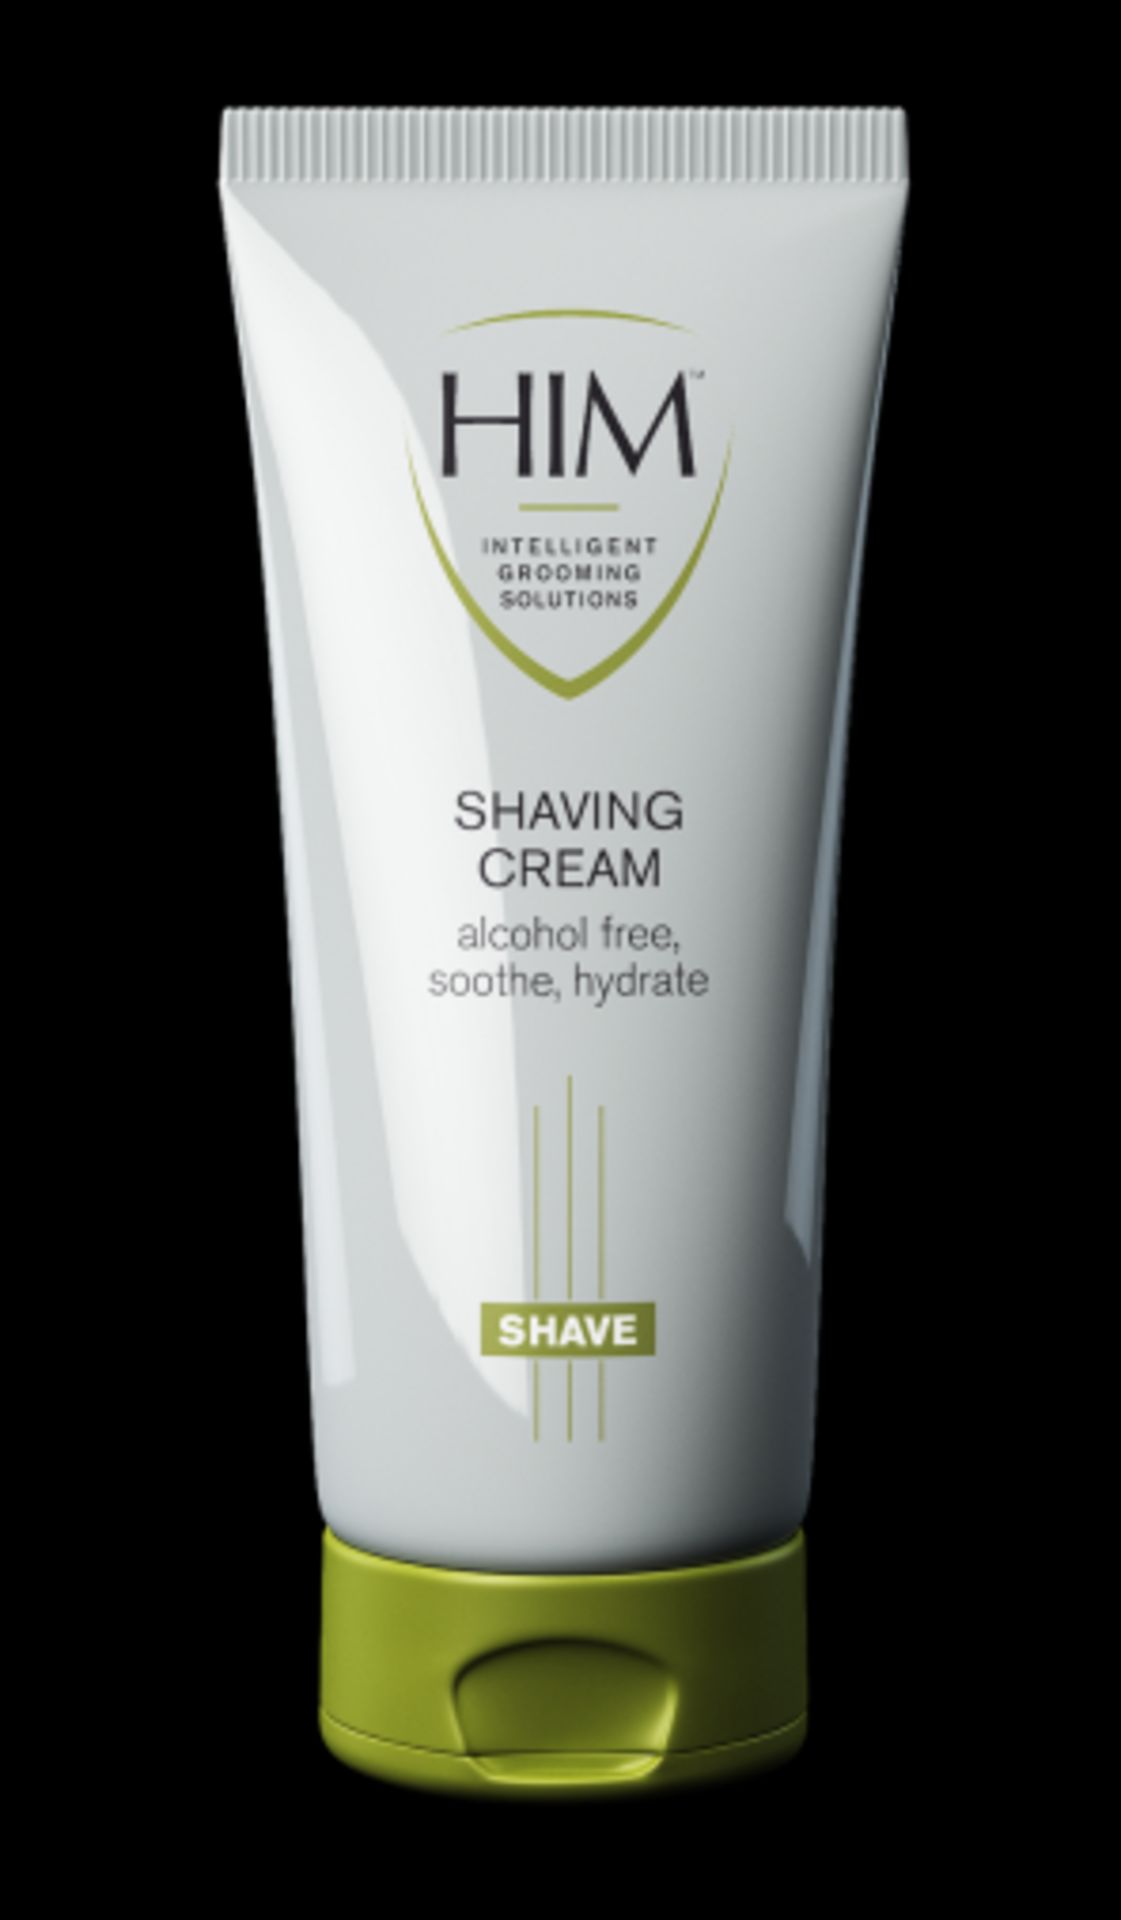 20 x HIM Intelligent Grooming Solutions - 75ml SHAVING CREAM - Brand New Stock - Alcohol Free, Sooth - Image 2 of 2